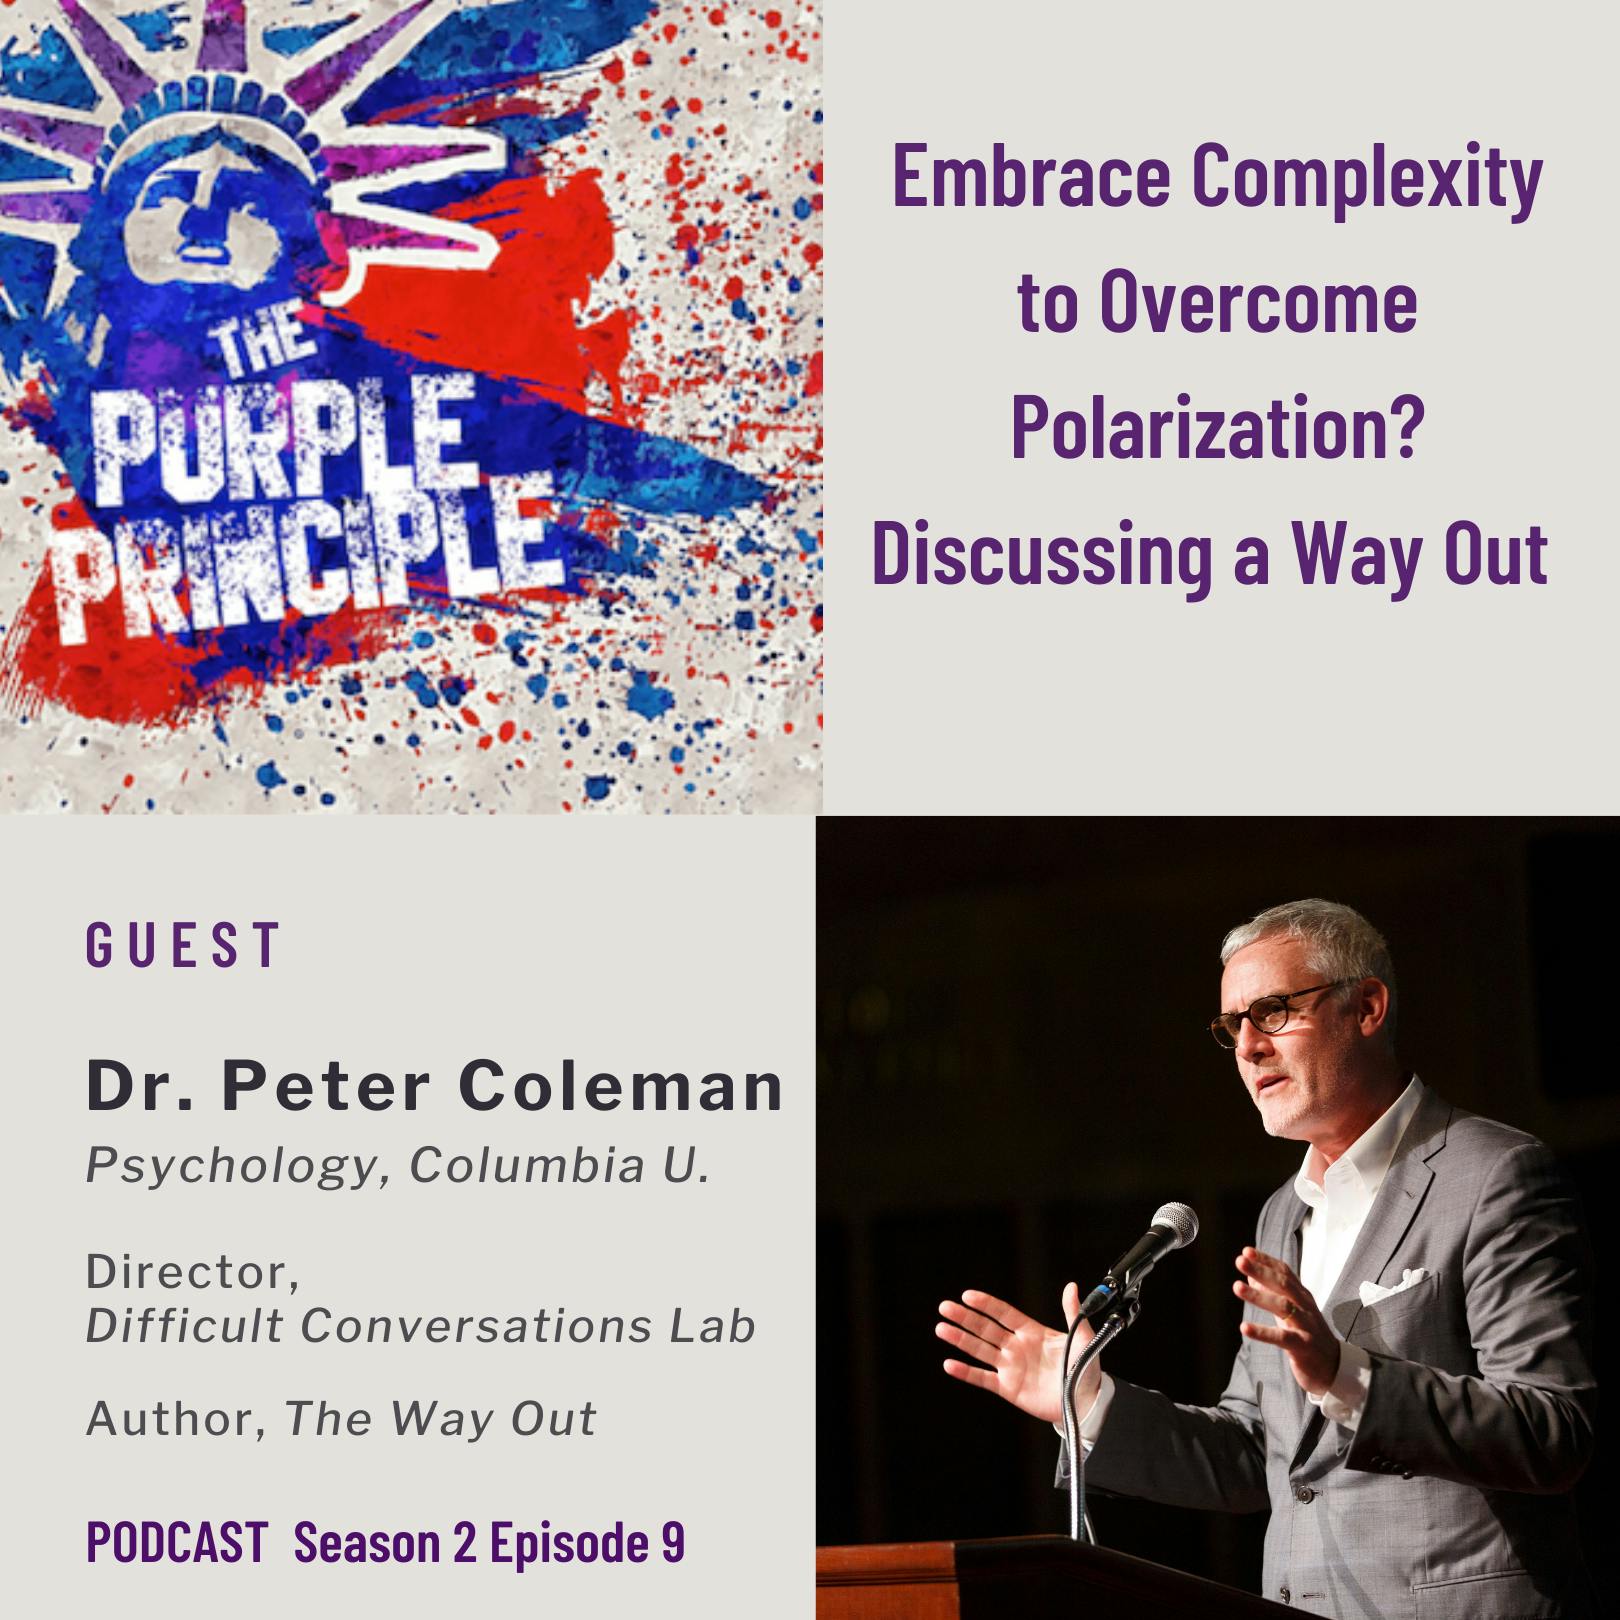 Embrace Complexity To Overcome Polarization? Discussing a Way Out with Dr. Peter Coleman of The Difficult Conversations Lab